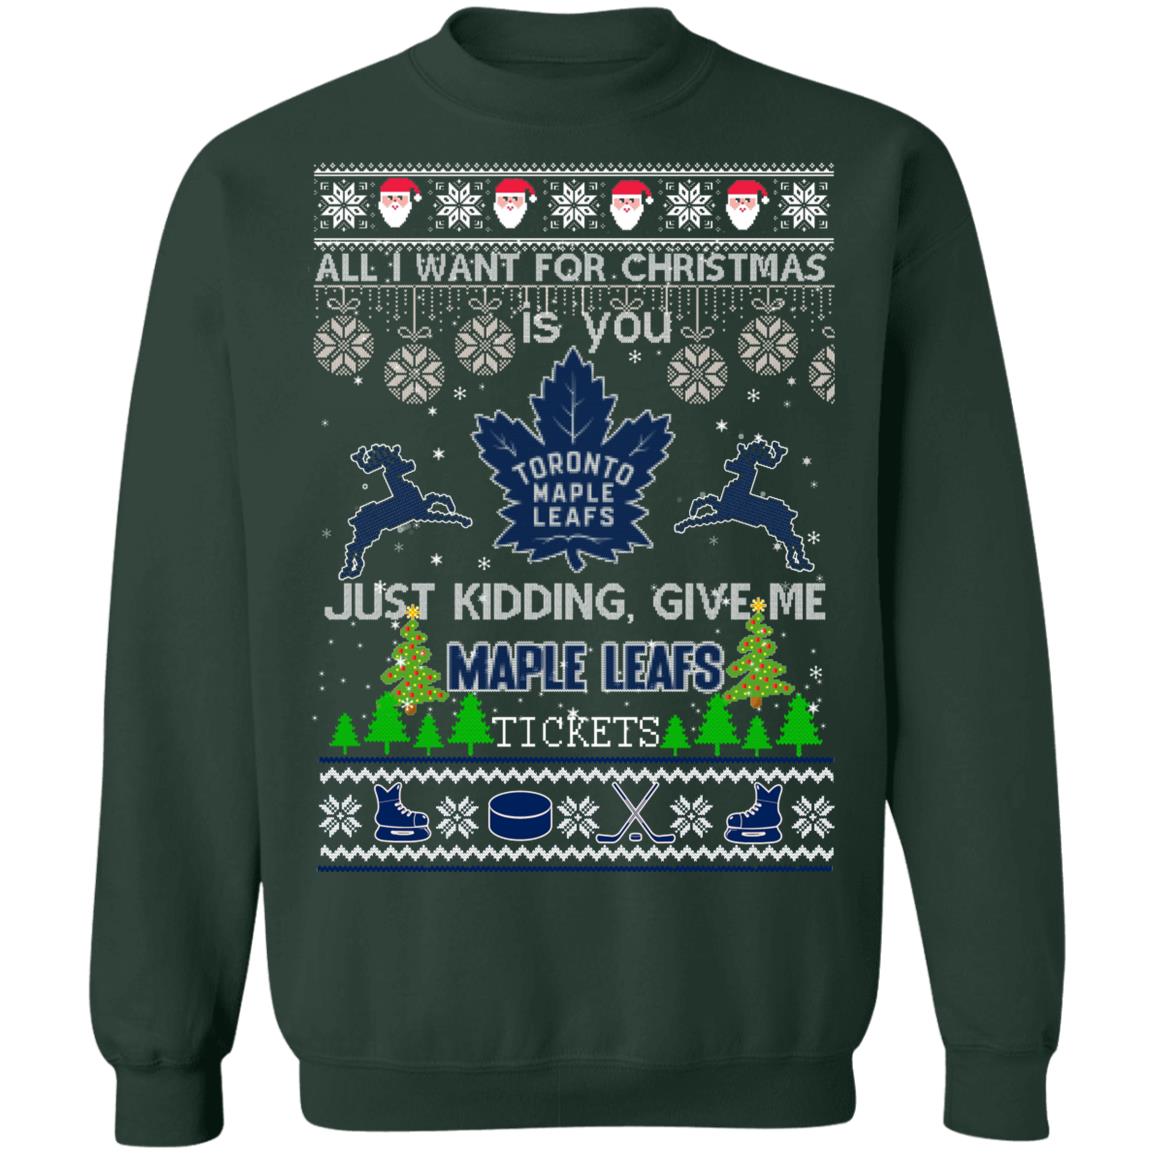 toronto maple leafs ugly jersey